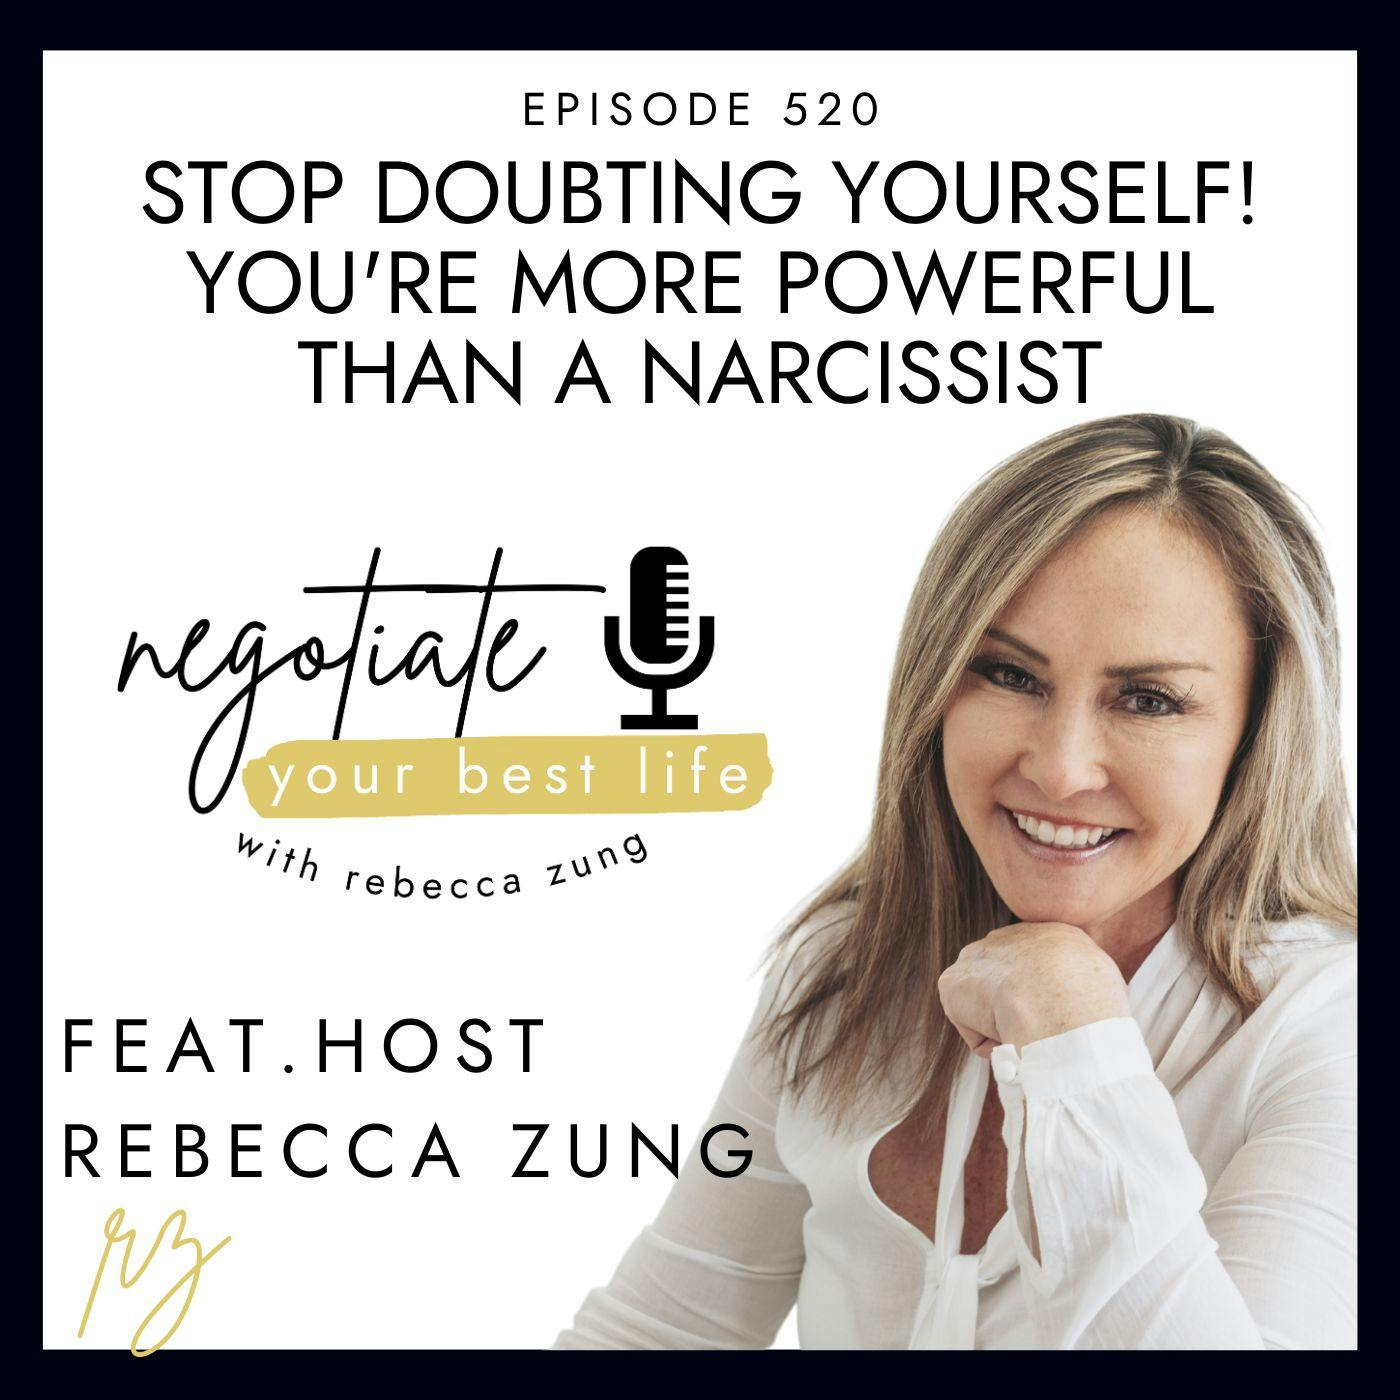 Stop Doubting Yourself! You're More Powerful Than A Narcissist with Rebecca Zung on Negotiate Your Best Life #520